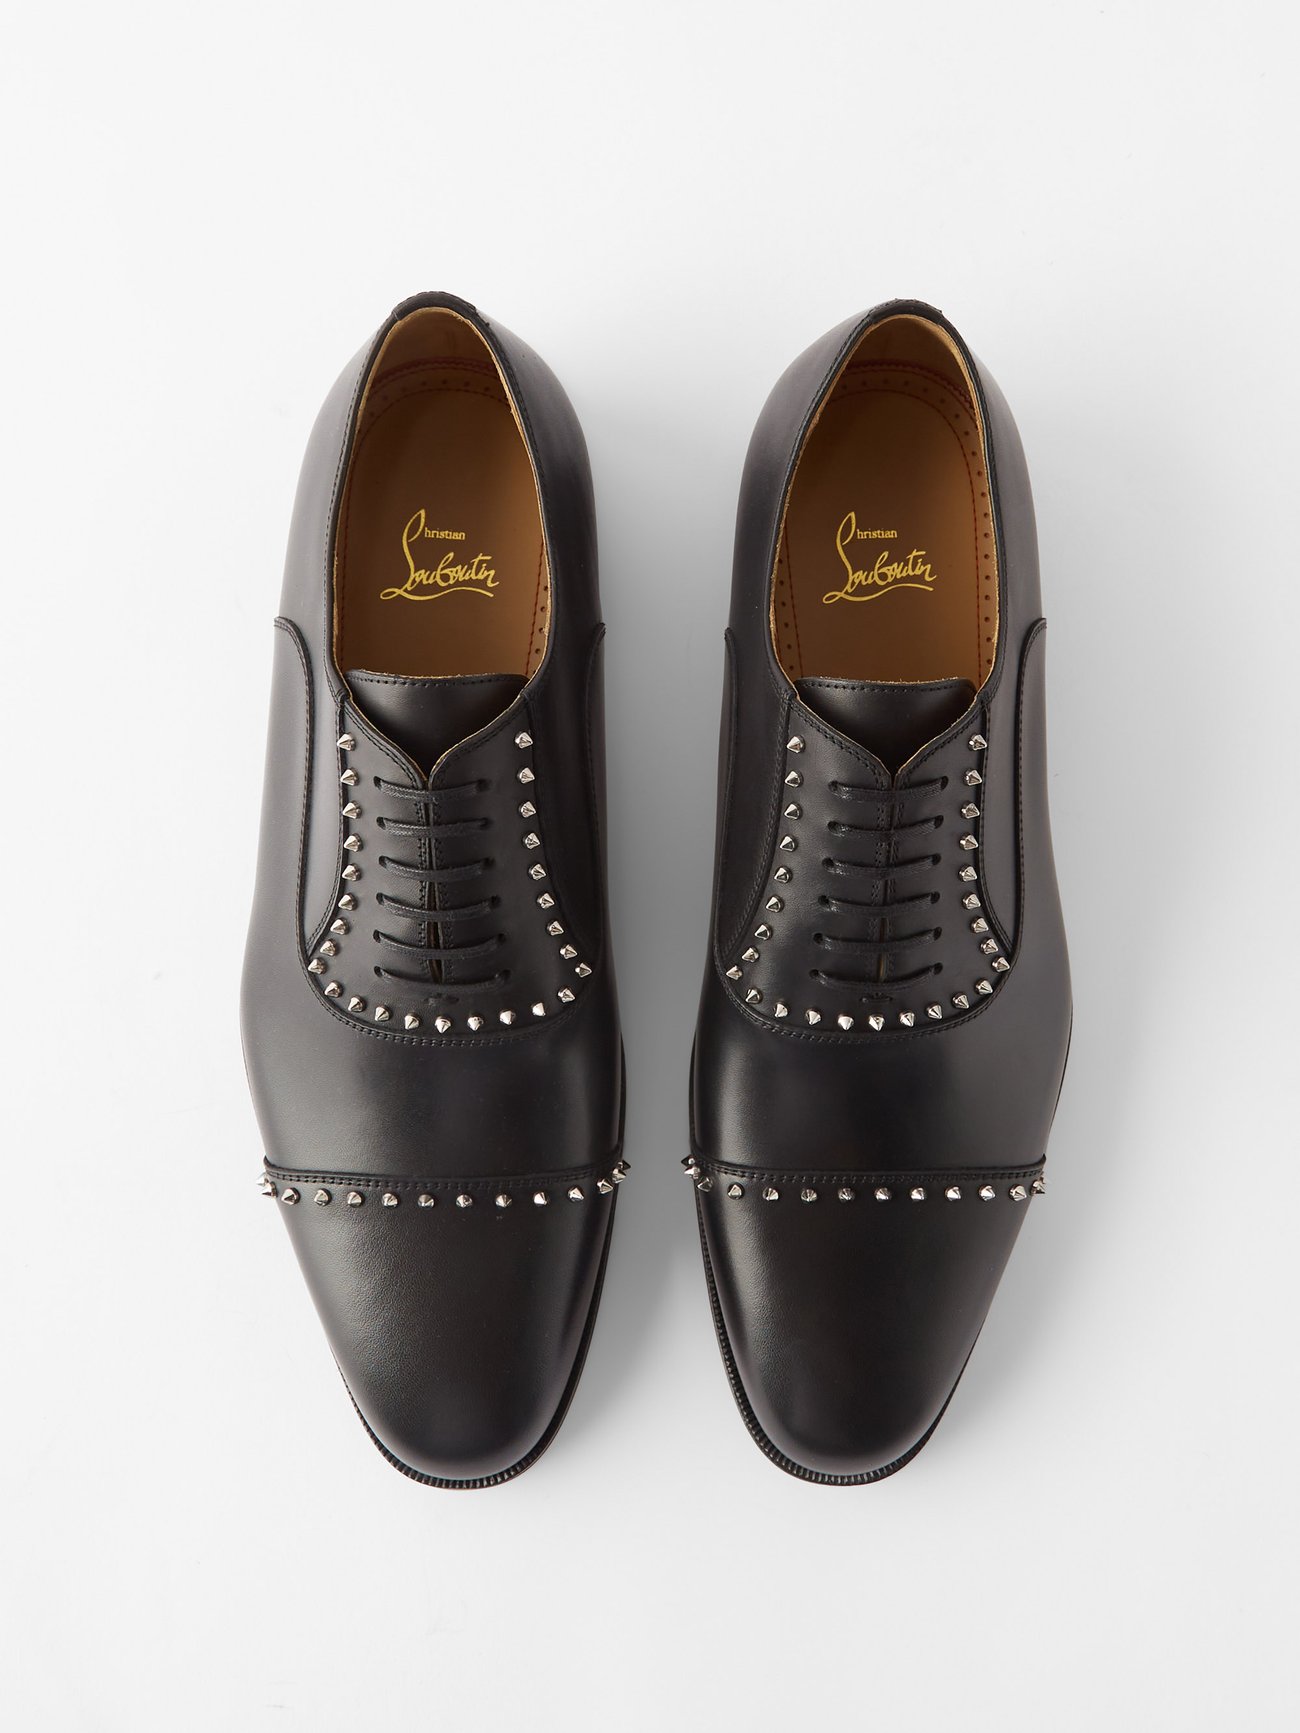 Cloocloo spike-embellished leather Derby shoes